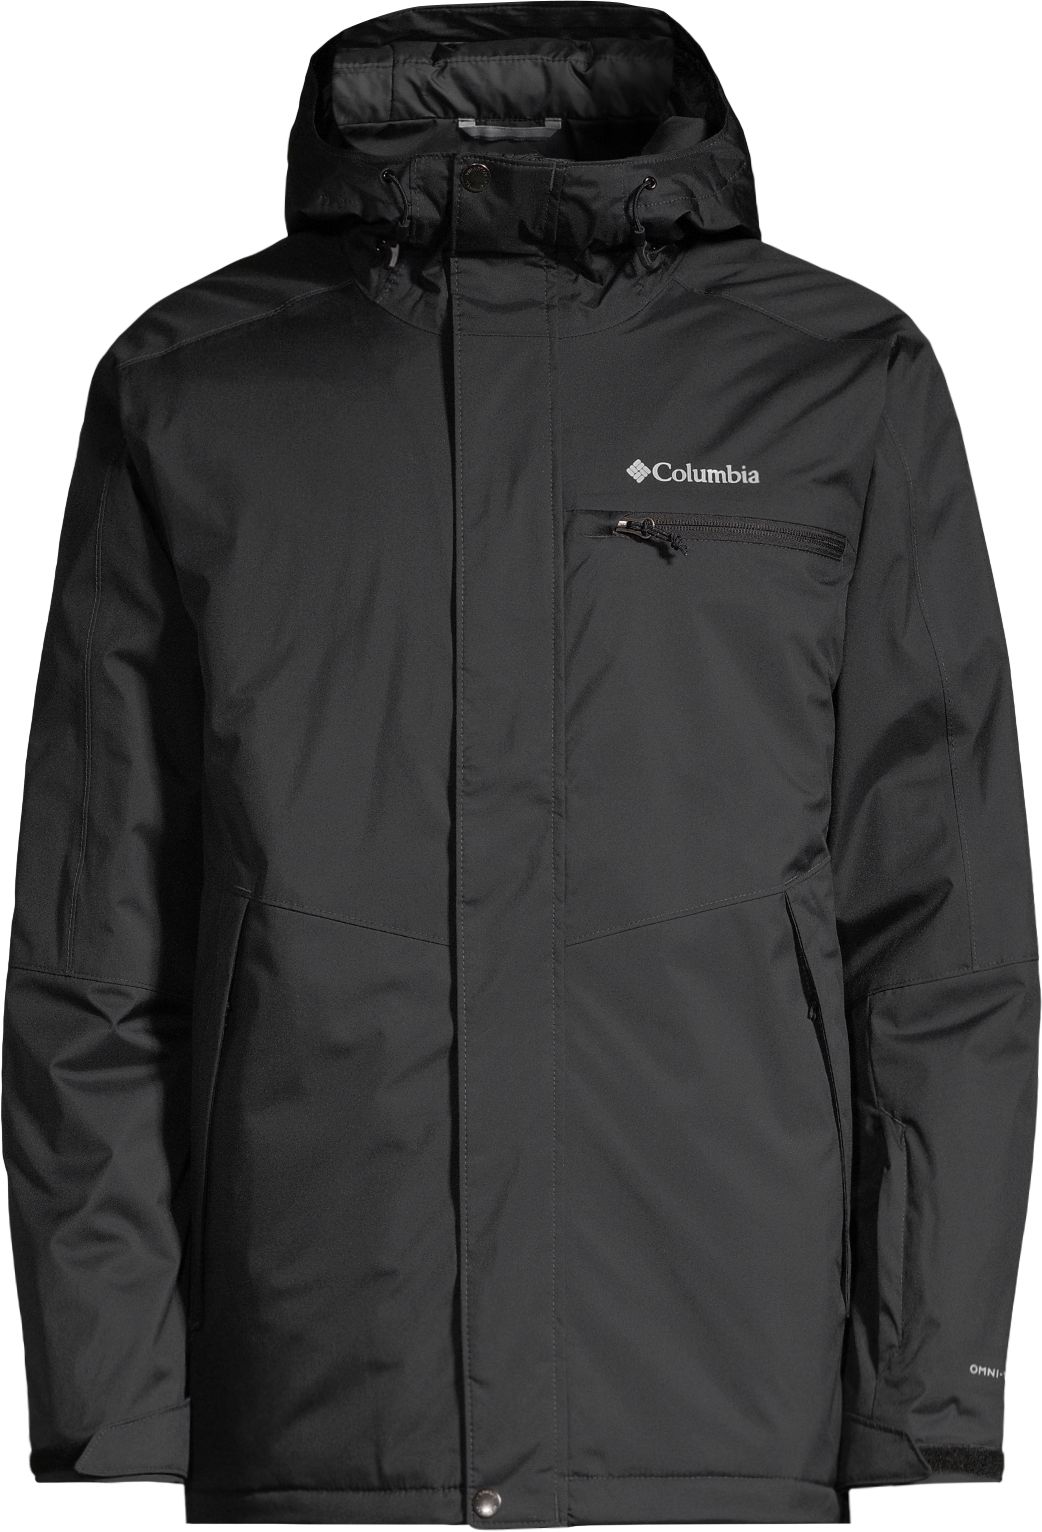 https://media-www.atmosphere.ca/product/div-03-softgoods/dpt-76-outerwear/sdpt-01-mens/333255065/columbia-mens-valley-point-in-black-010-s--cb2430b4-4e77-4bd7-9c56-401f7579e102-jpgrendition.jpg?imdensity=1&imwidth=1244&impolicy=mZoom